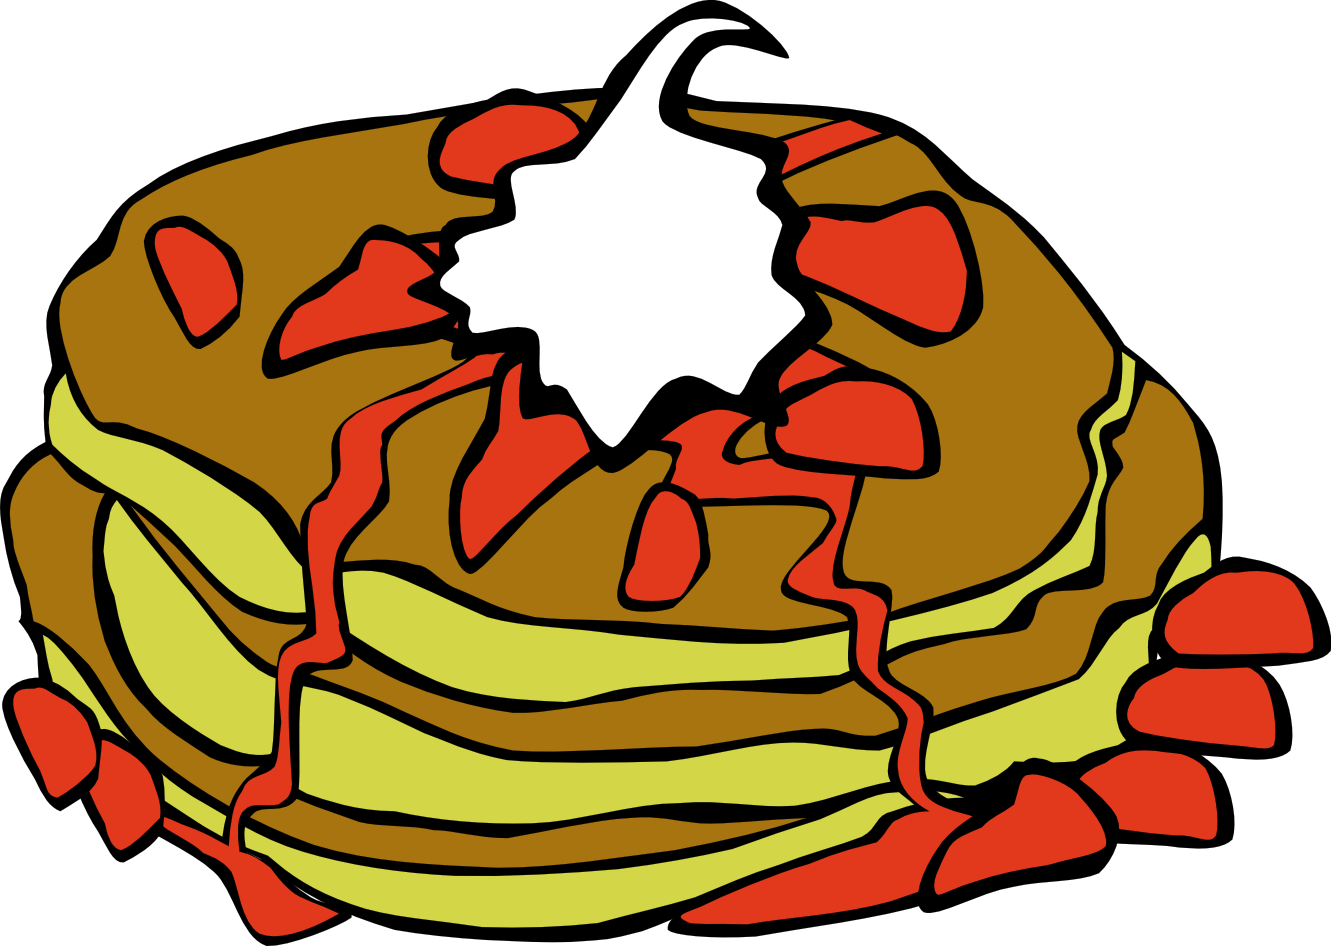 Eat breakfast clipart with eat a high protein breakfast image